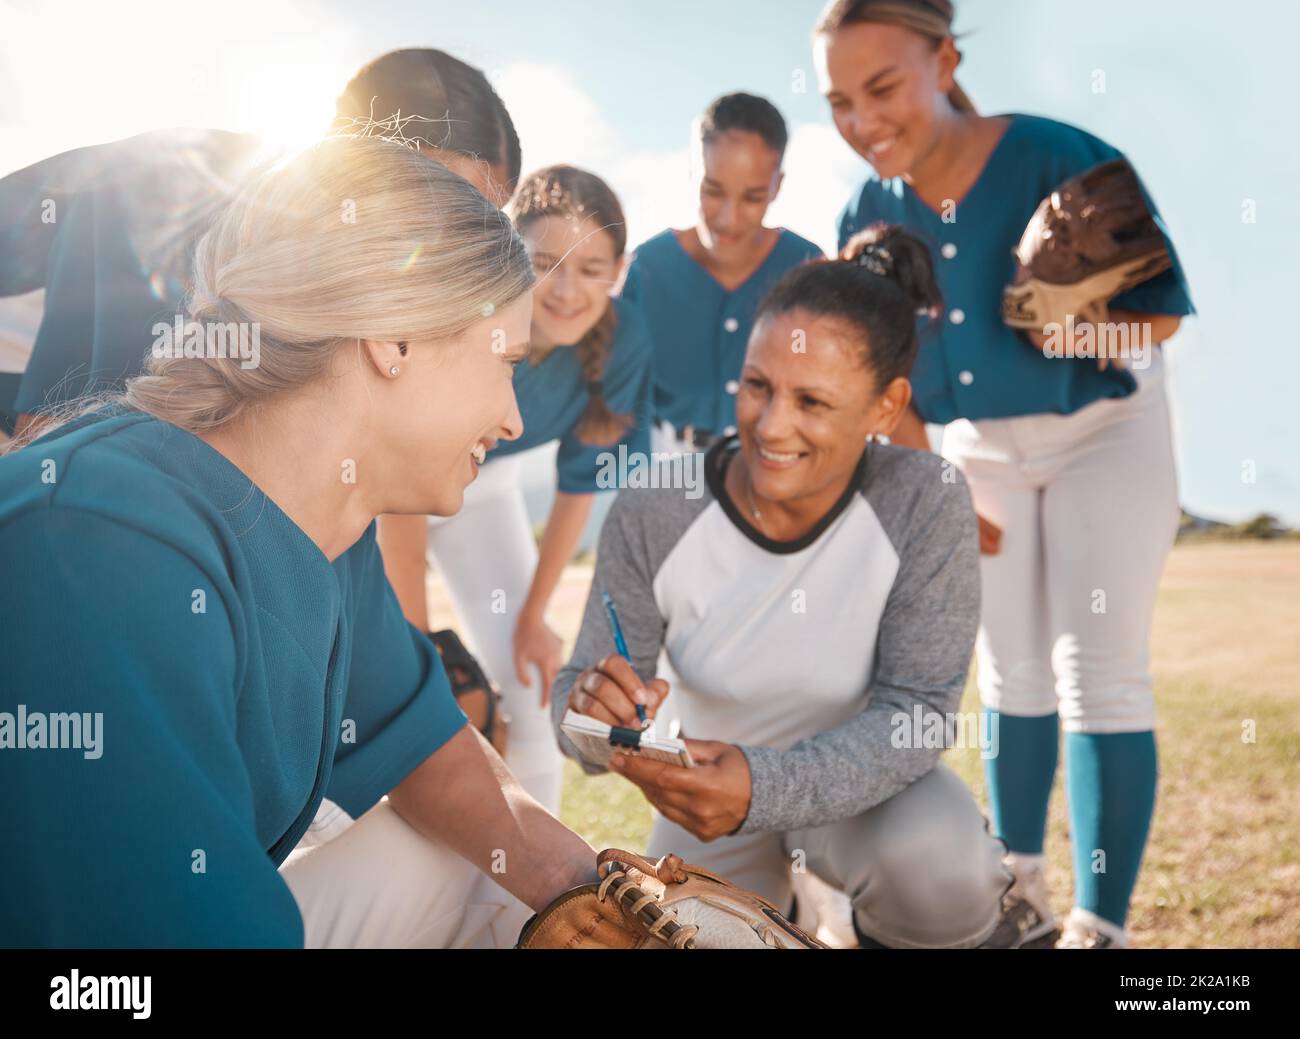 Baseball, sports and coach in team management, collaboration and development during practice on the outdoor pitch. Happy competitive women in sport Stock Photo